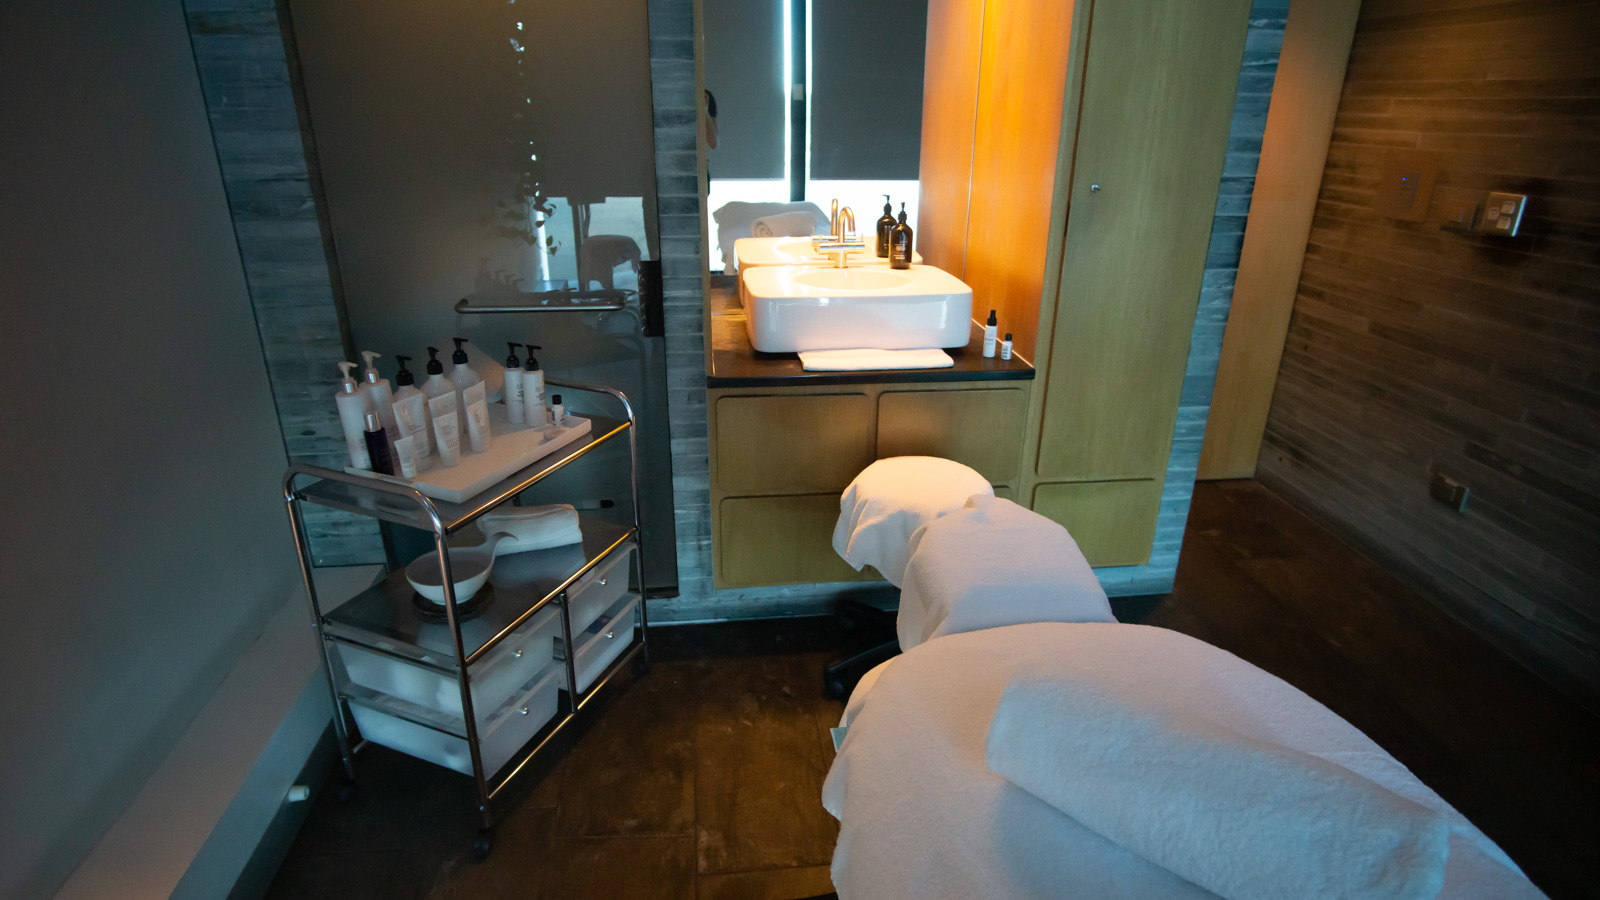 Treatment room at the Qantas First Lounge spa in Melbourne